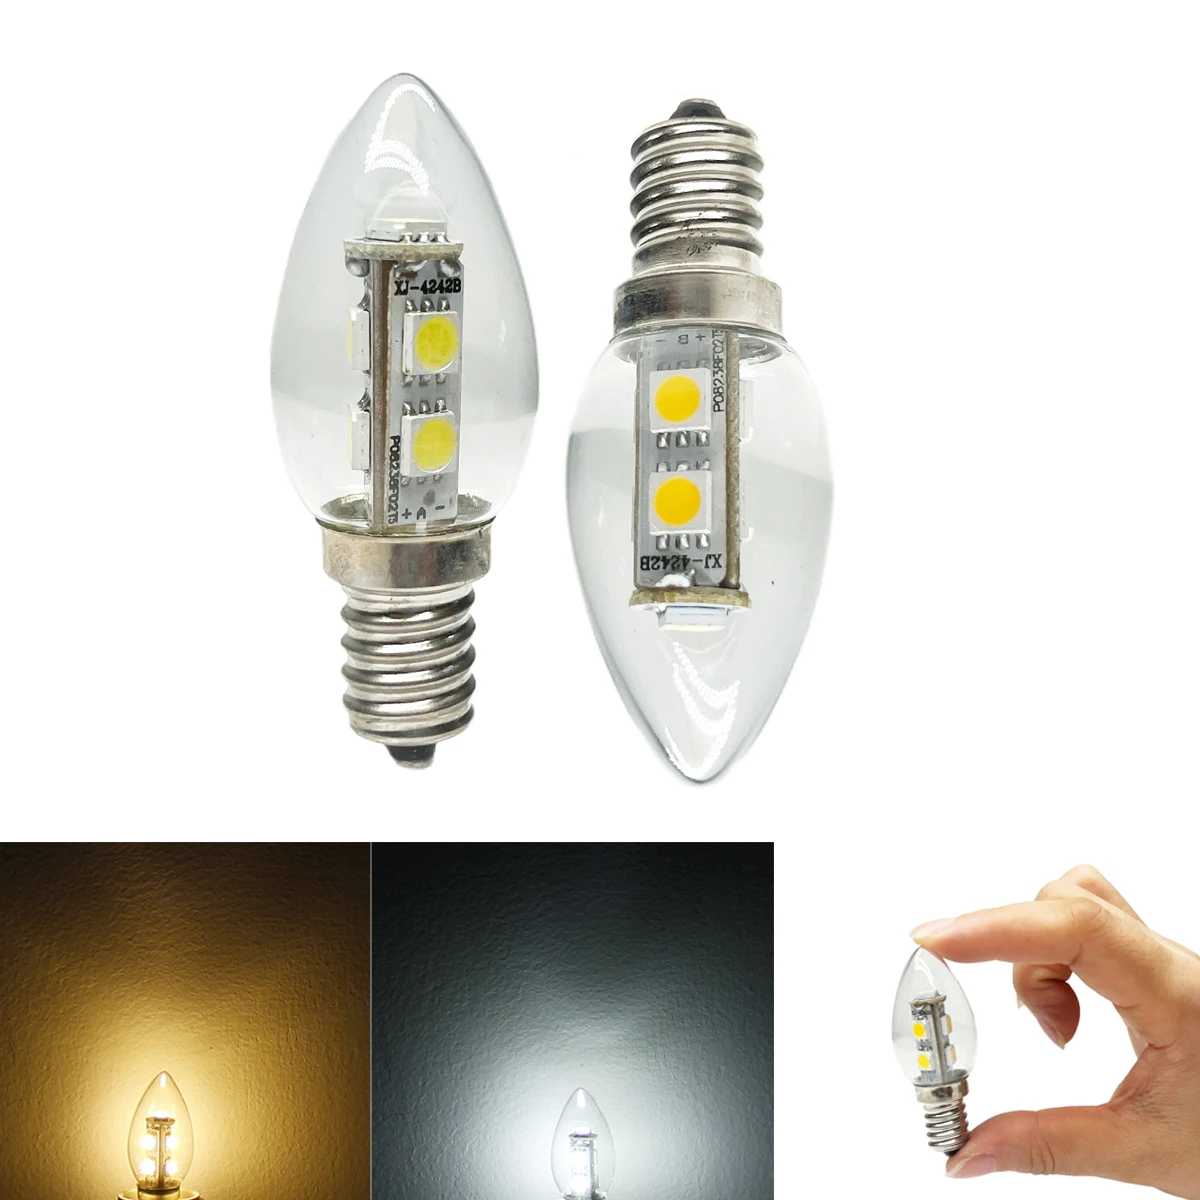 E12 LED Candelabra Candle Light Bulb 1W 5050 SMD Glass Shell Cold Warm White 15W Halogen Lamp Replacement For Chandelier Decor led candle edison bulb c7 0 5w amber glass e14 retro filament night lamp warm white 2200k candelabra lamp dimmable e12 220v bulb